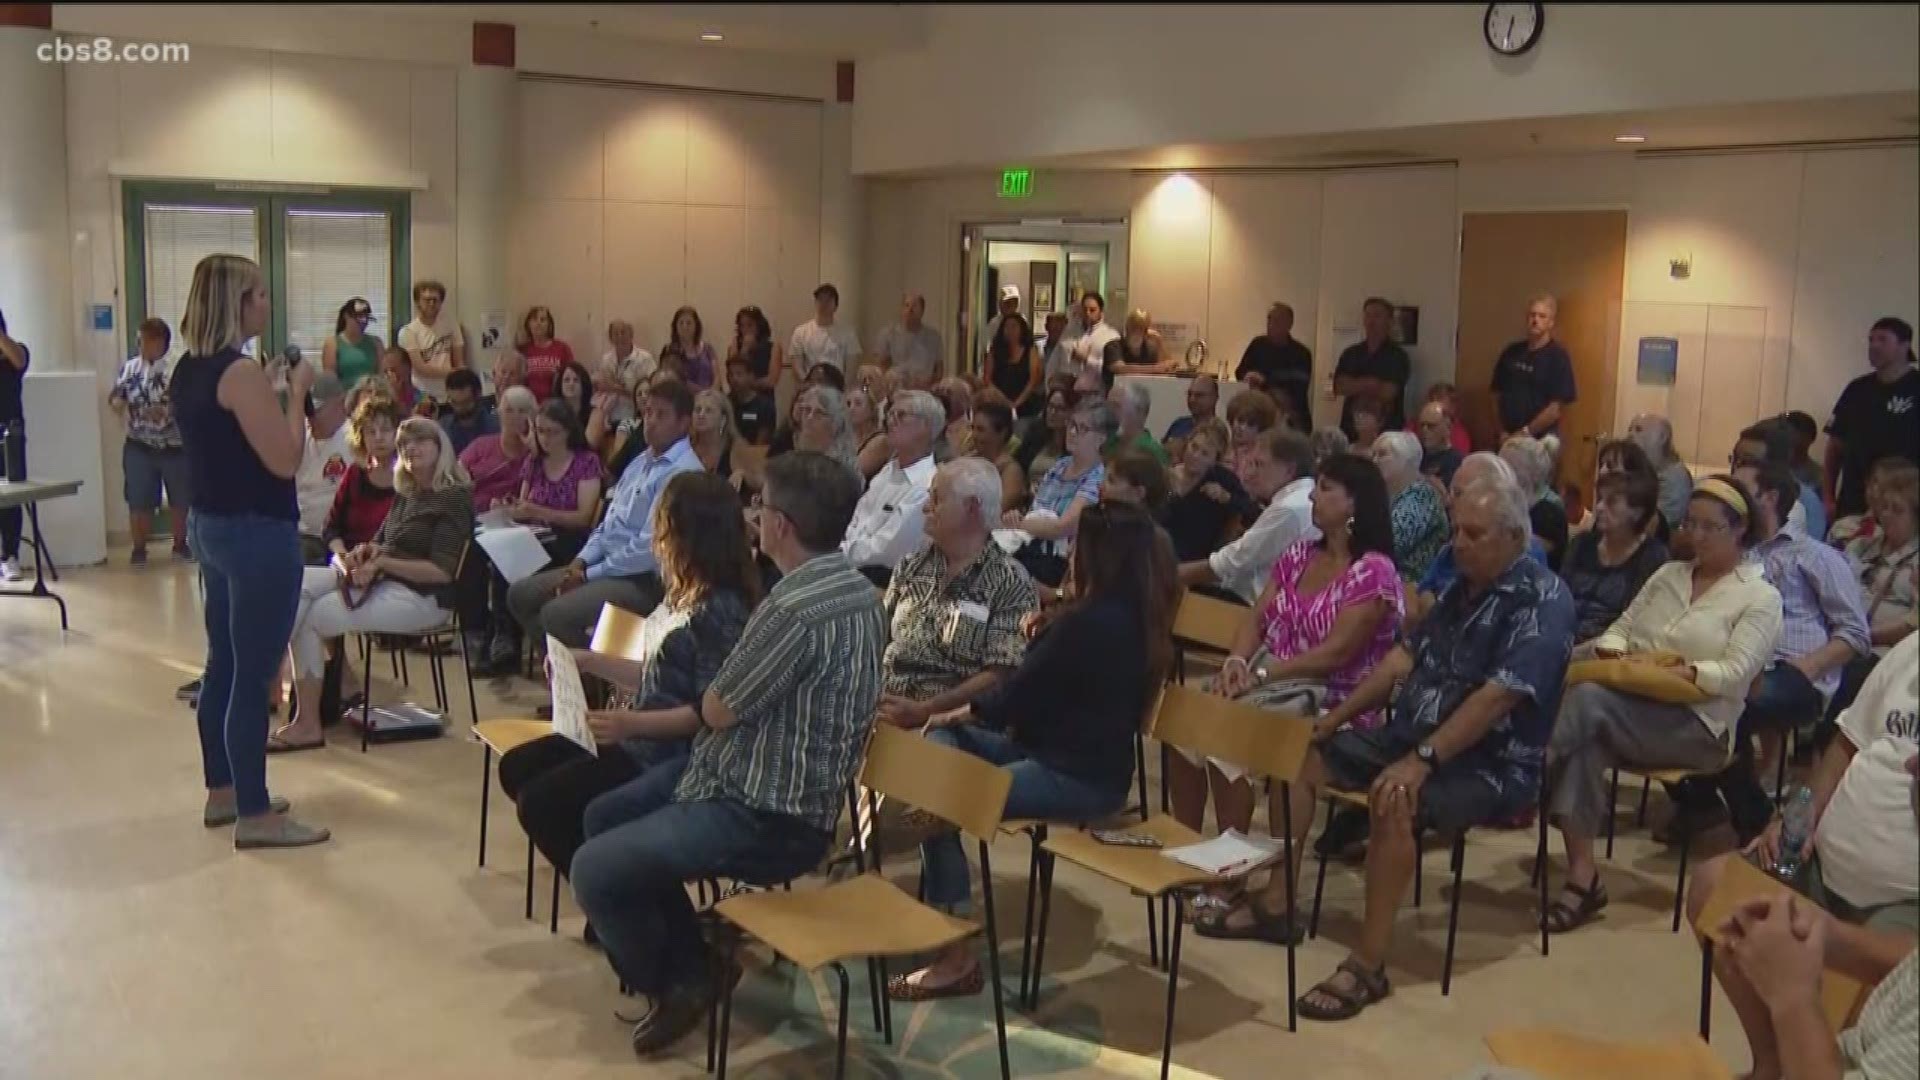 Point Loma residents fighting to save a piece of open space from development are claiming victory after dozens of them voiced their concerns at a meeting of the Peninsula Community Planning Board Wednesday night.